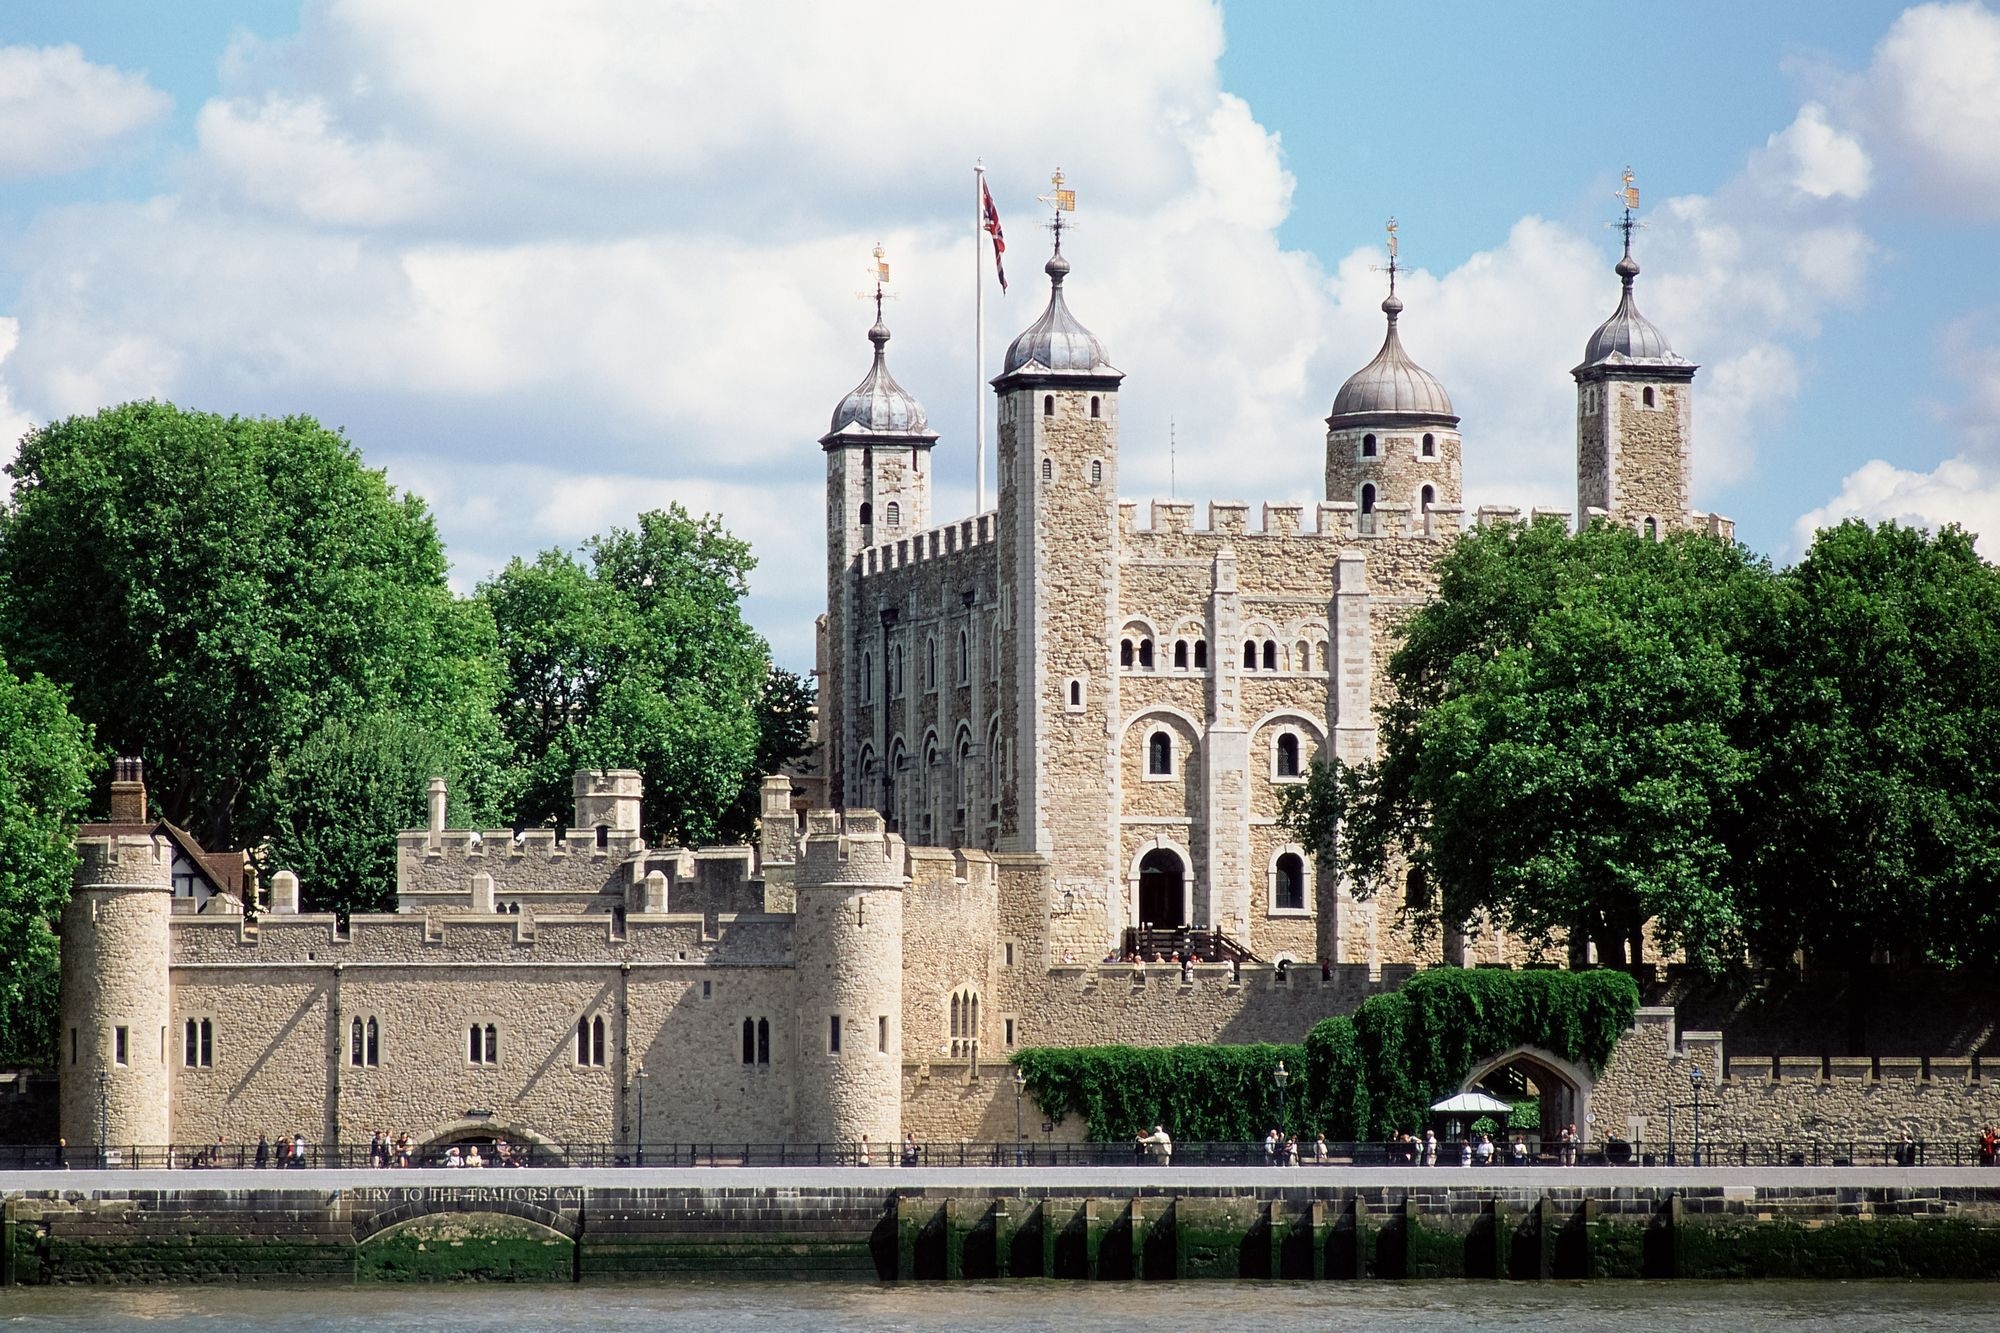 Tower of London wallpapers, Tower backgrounds, 2000x1340 HD Desktop